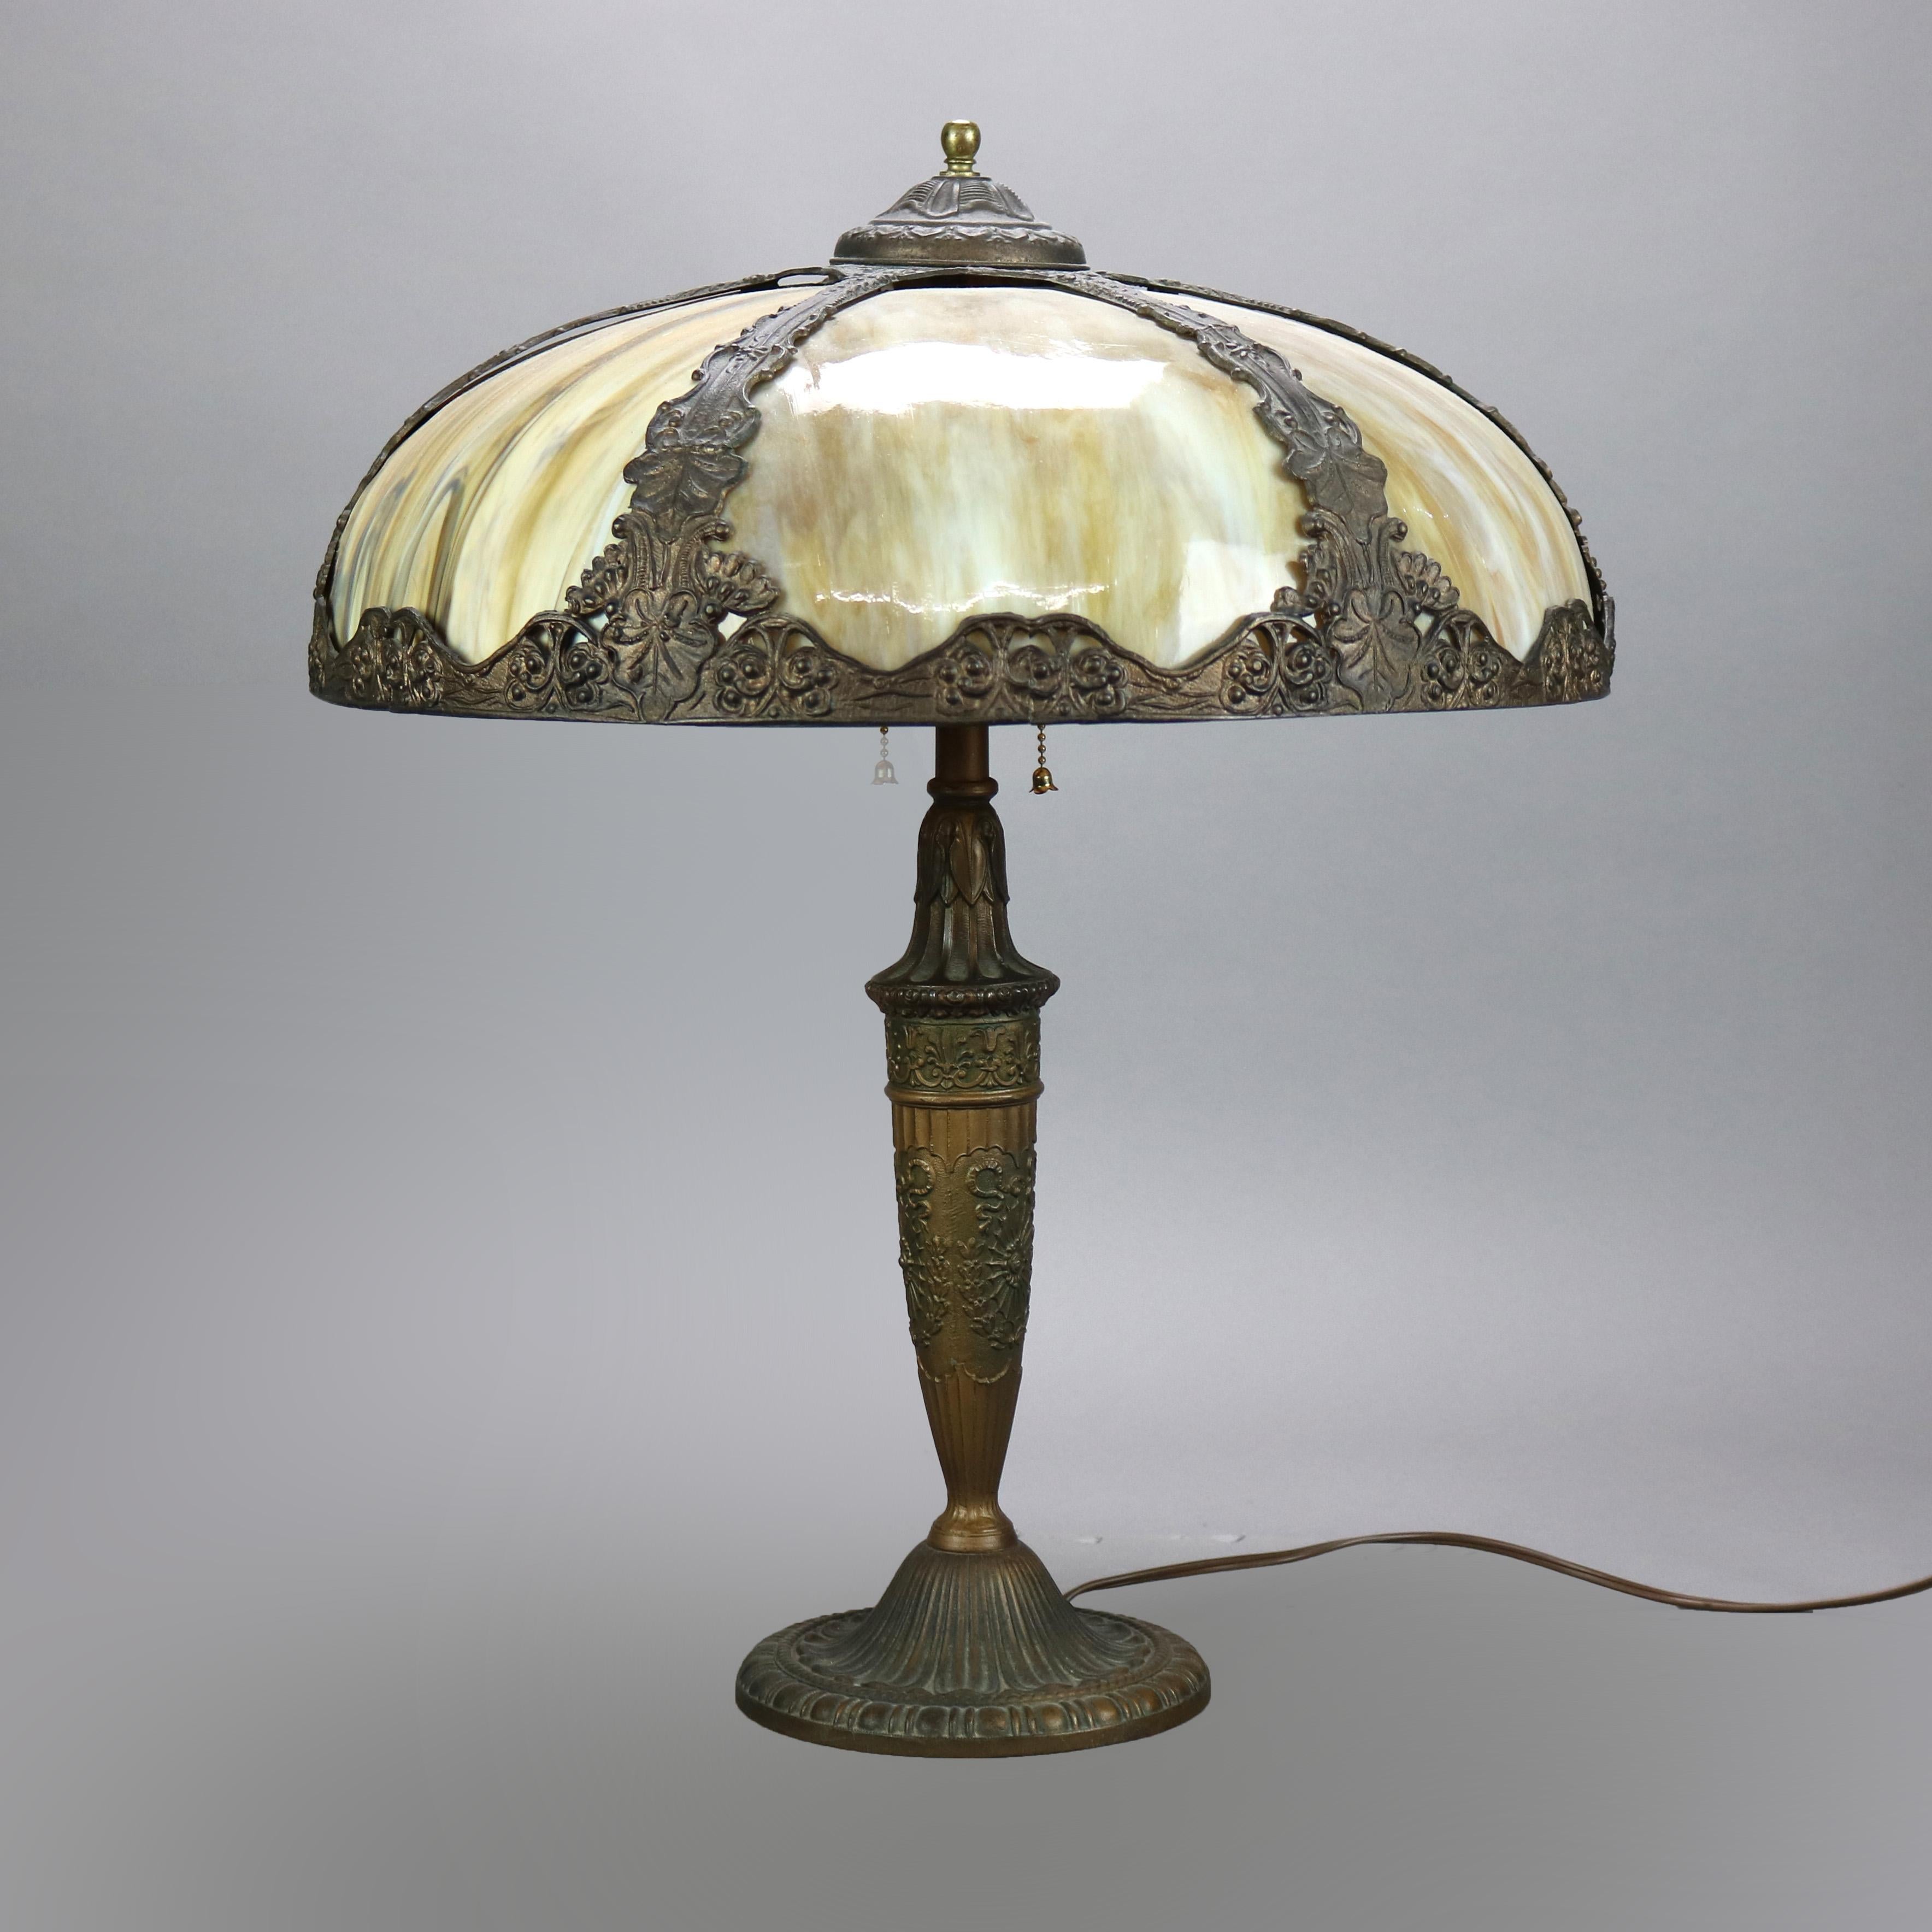 An antique Arts and Crafts table lamp in the manner of Bradley and Hubbard offers cast frame with stylized grape and leaf design and housing bent slag glass panels over cast urn form double socket base, c1920

Measures - 22''H x 18''W x